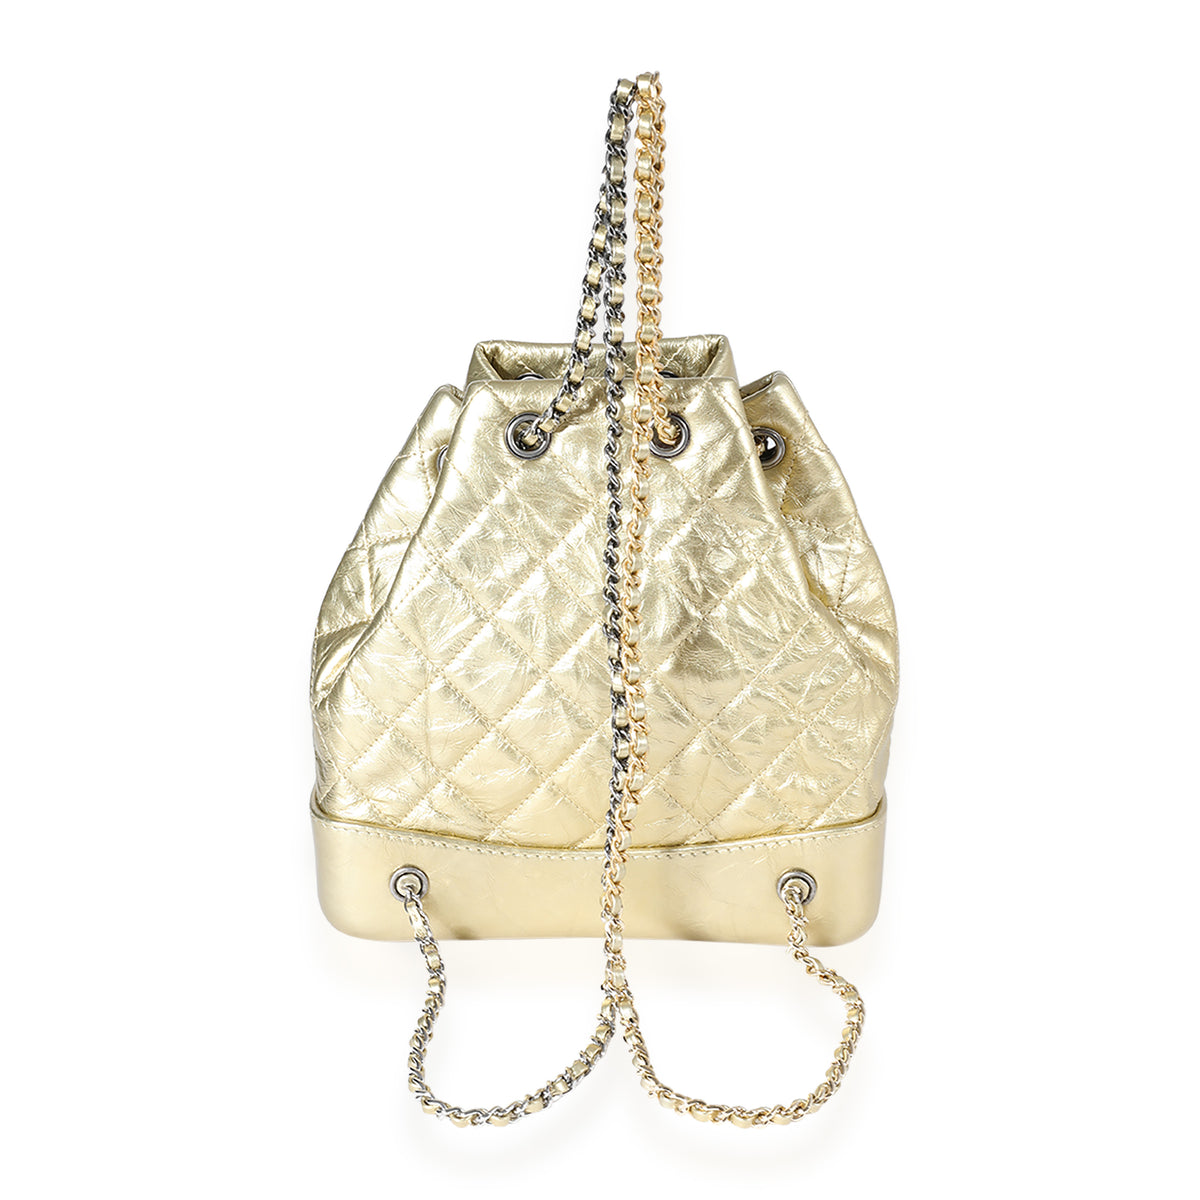 Chanel Metallic Gold Quilted Calfskin Small Gabrielle Backpack